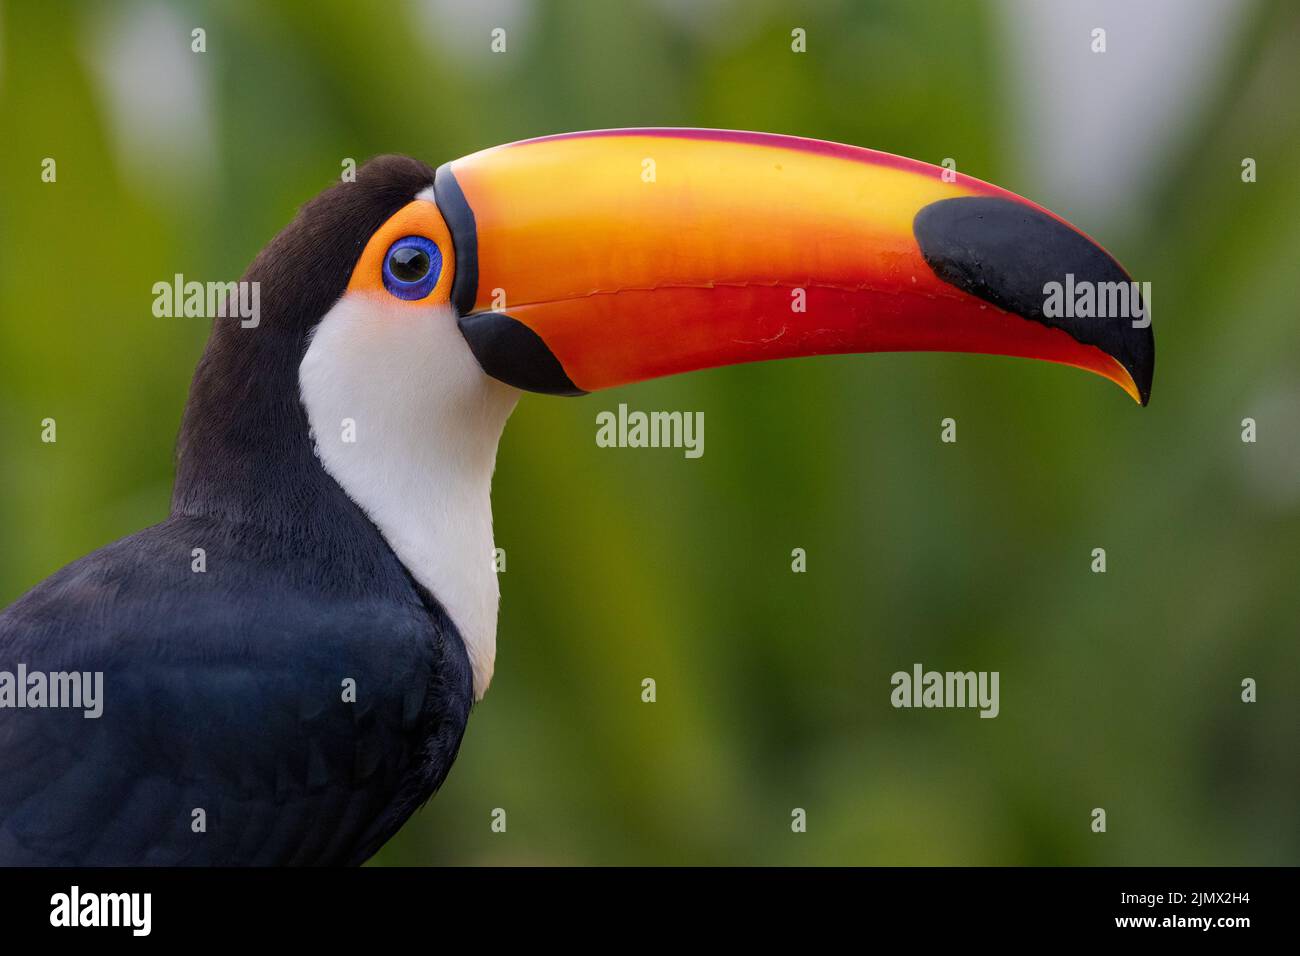 Close-up of a Toco Toucan (Ramphastos toco), the largest of over 40 different species of Toucan, perched on a branch in the Pantanal of Brazil. Stock Photo